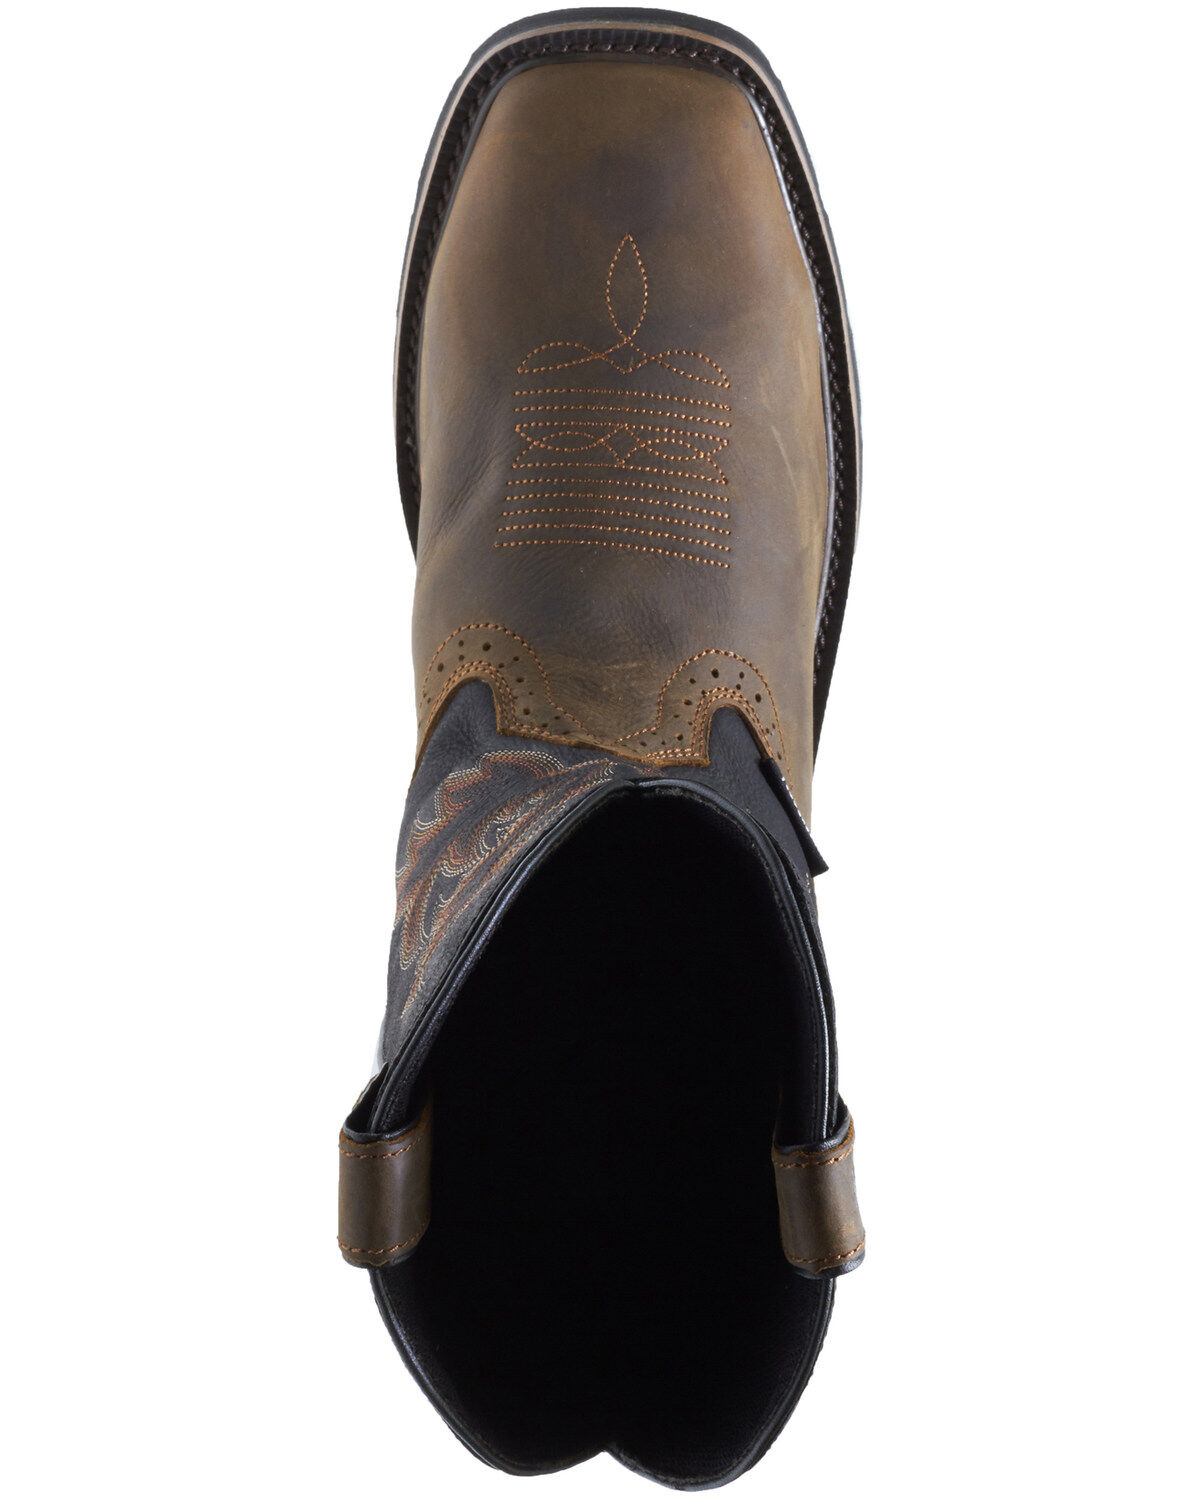 wolverine rancher square toe wellington work boots